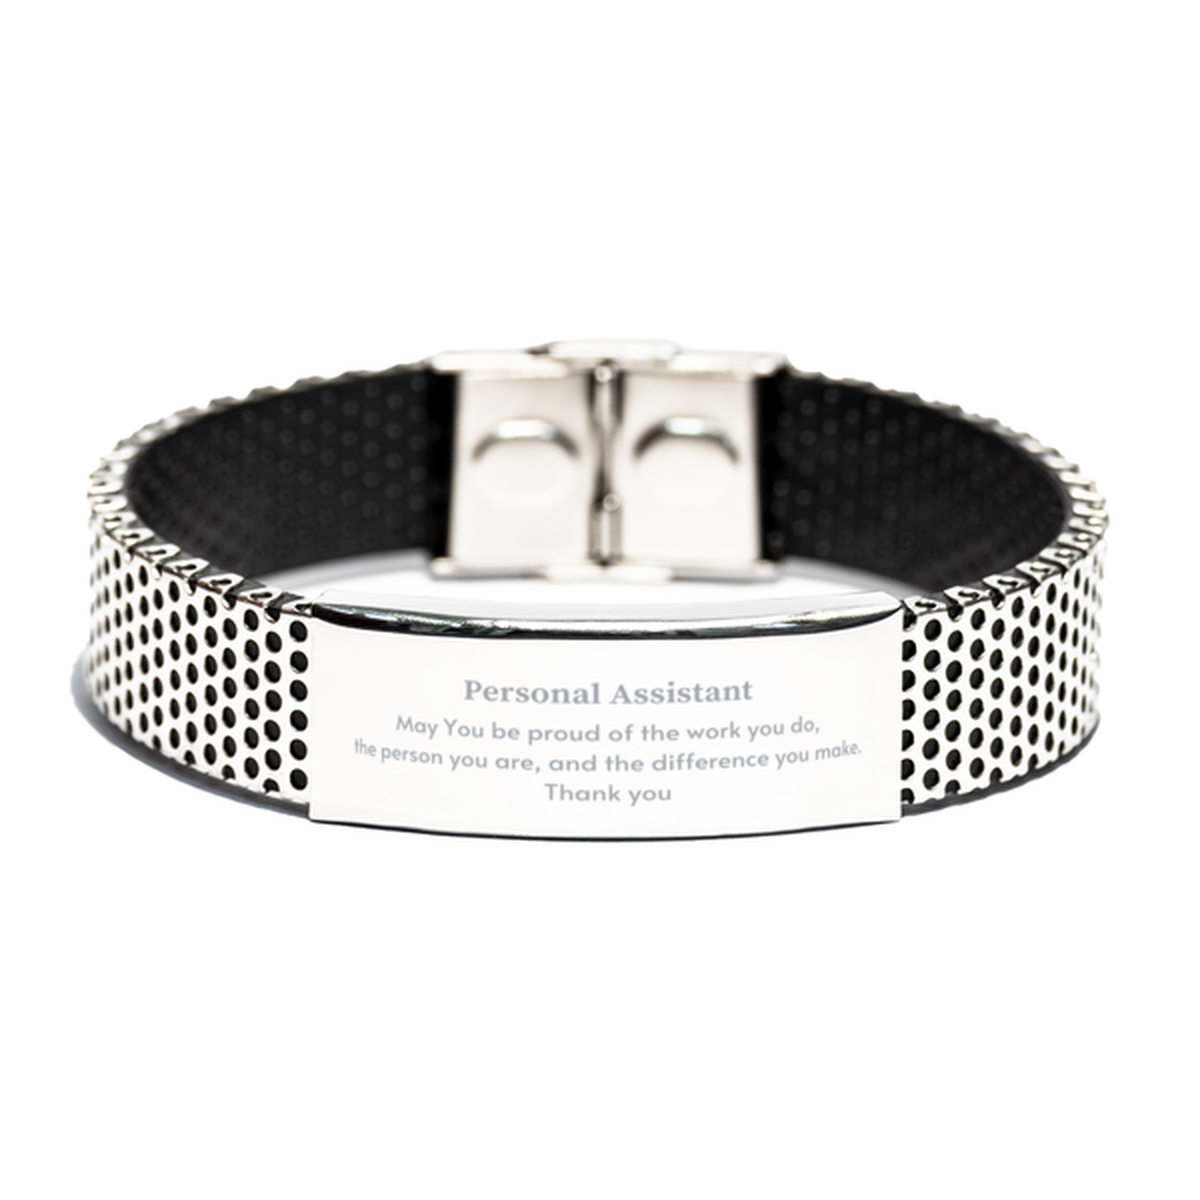 Heartwarming Stainless Steel Bracelet Retirement Coworkers Gifts for Personal Assistant, Personal Assistant May You be proud of the work you do, the person you are Gifts for Boss Men Women Friends